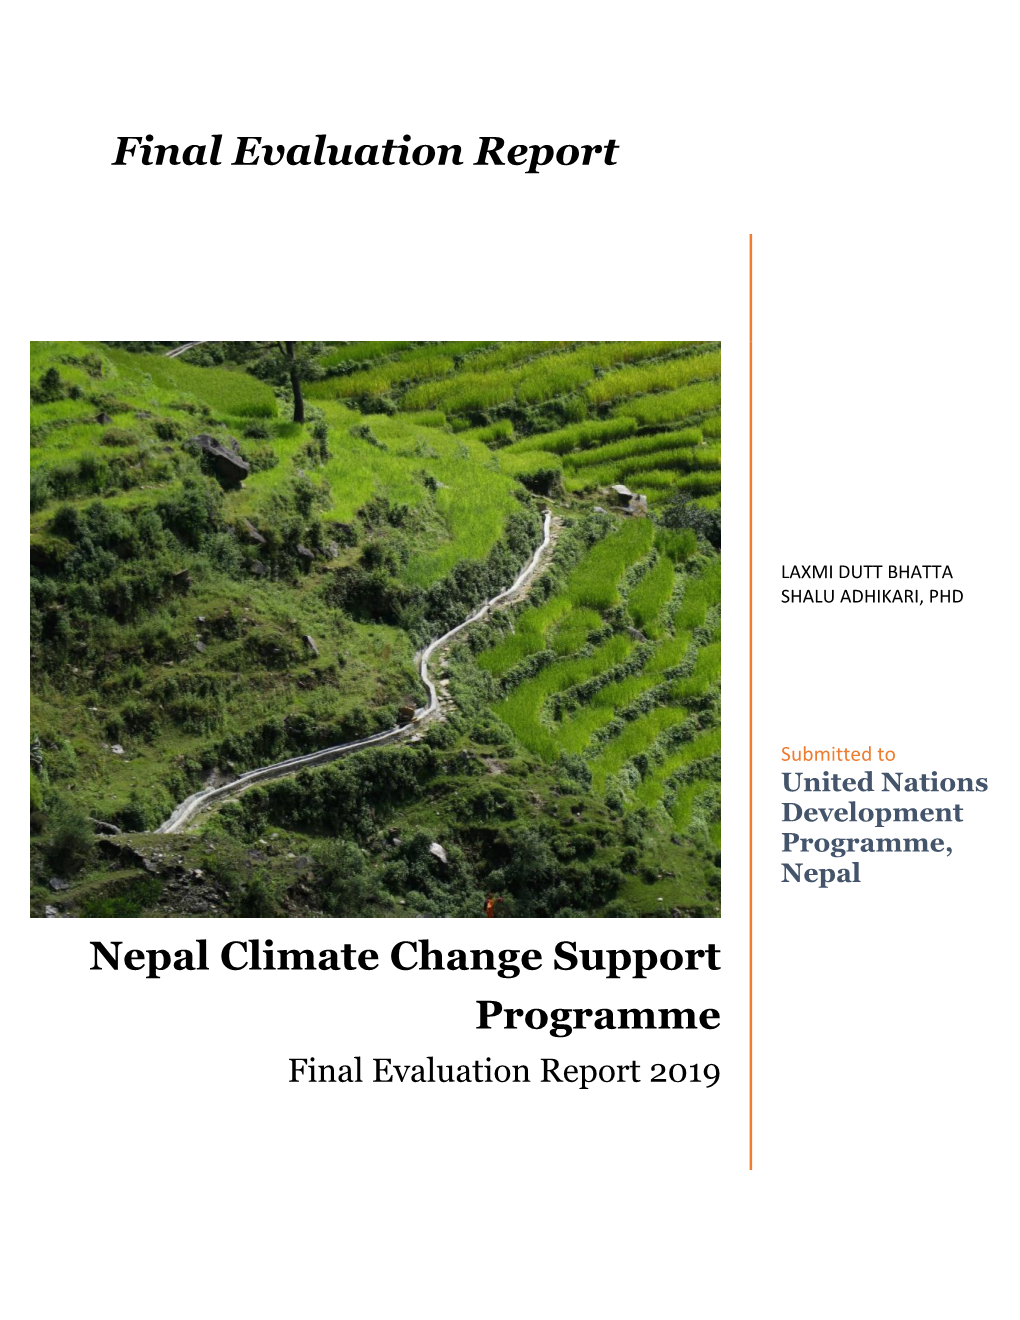 Nepal Climate Change Support Programme